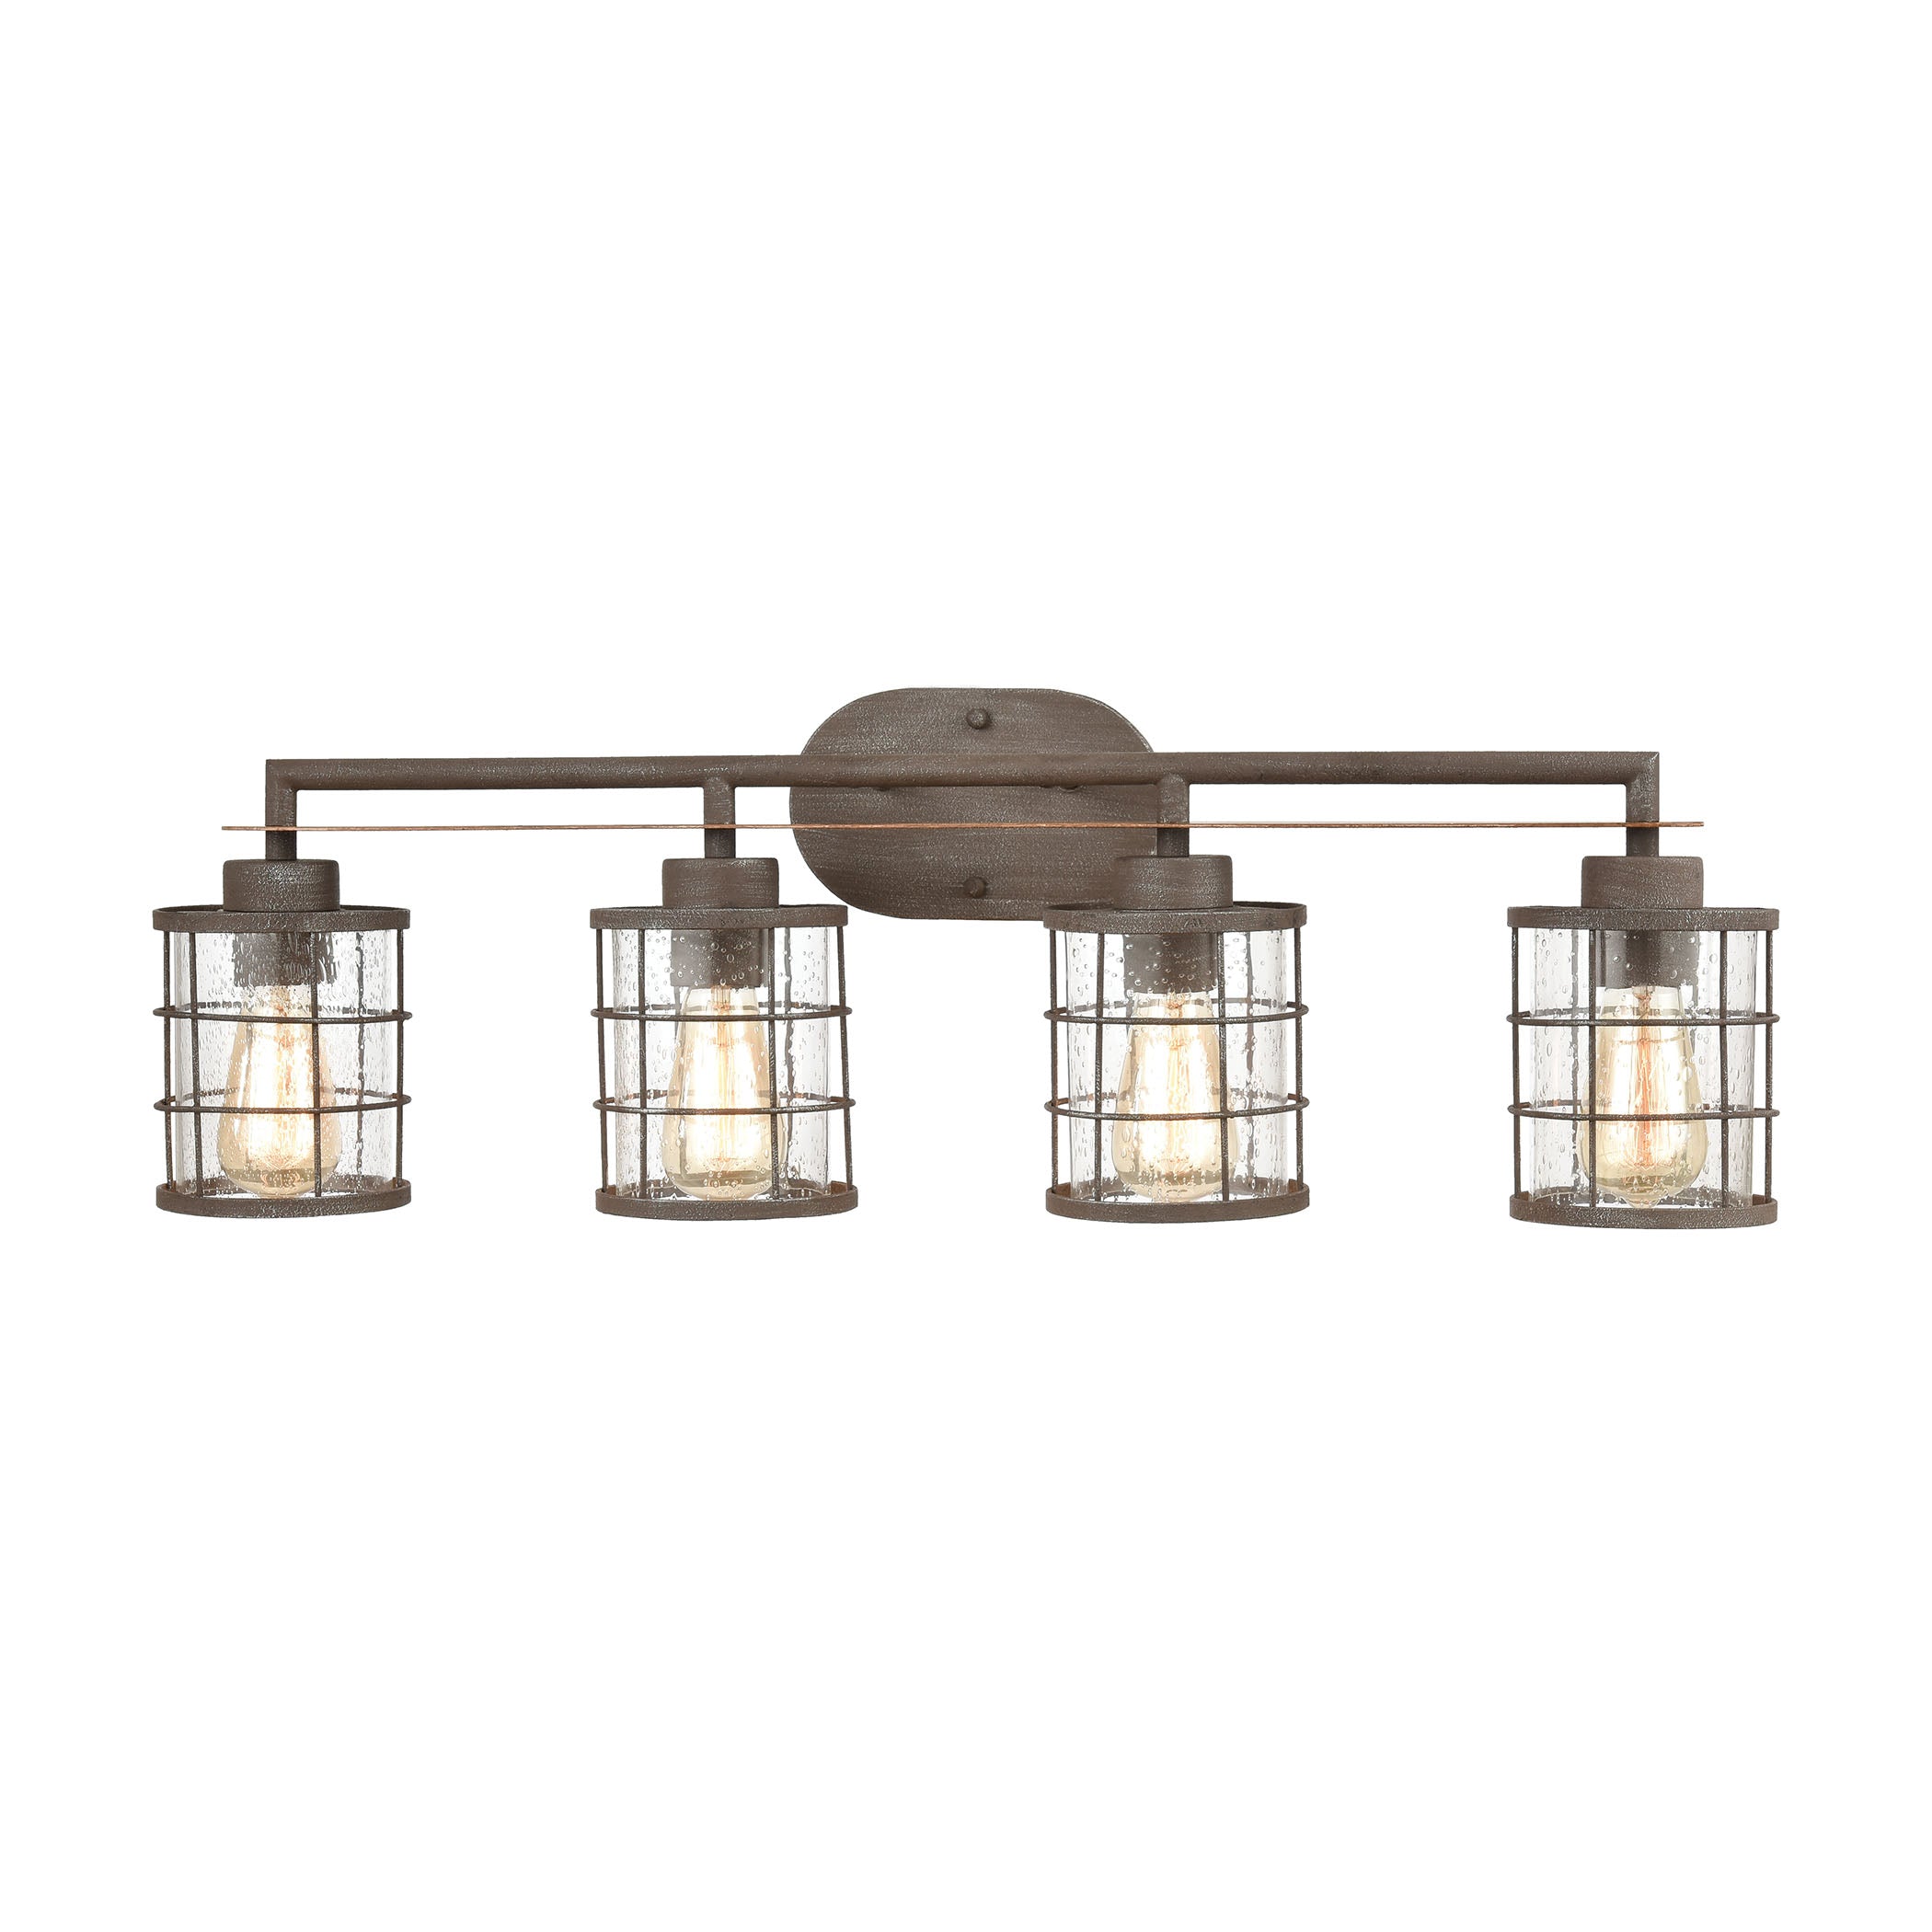 ELK Lighting 18366/4 Gilbert 4-Light Vanity Light in Rusted Coffee and Light Wood with Seedy Glass